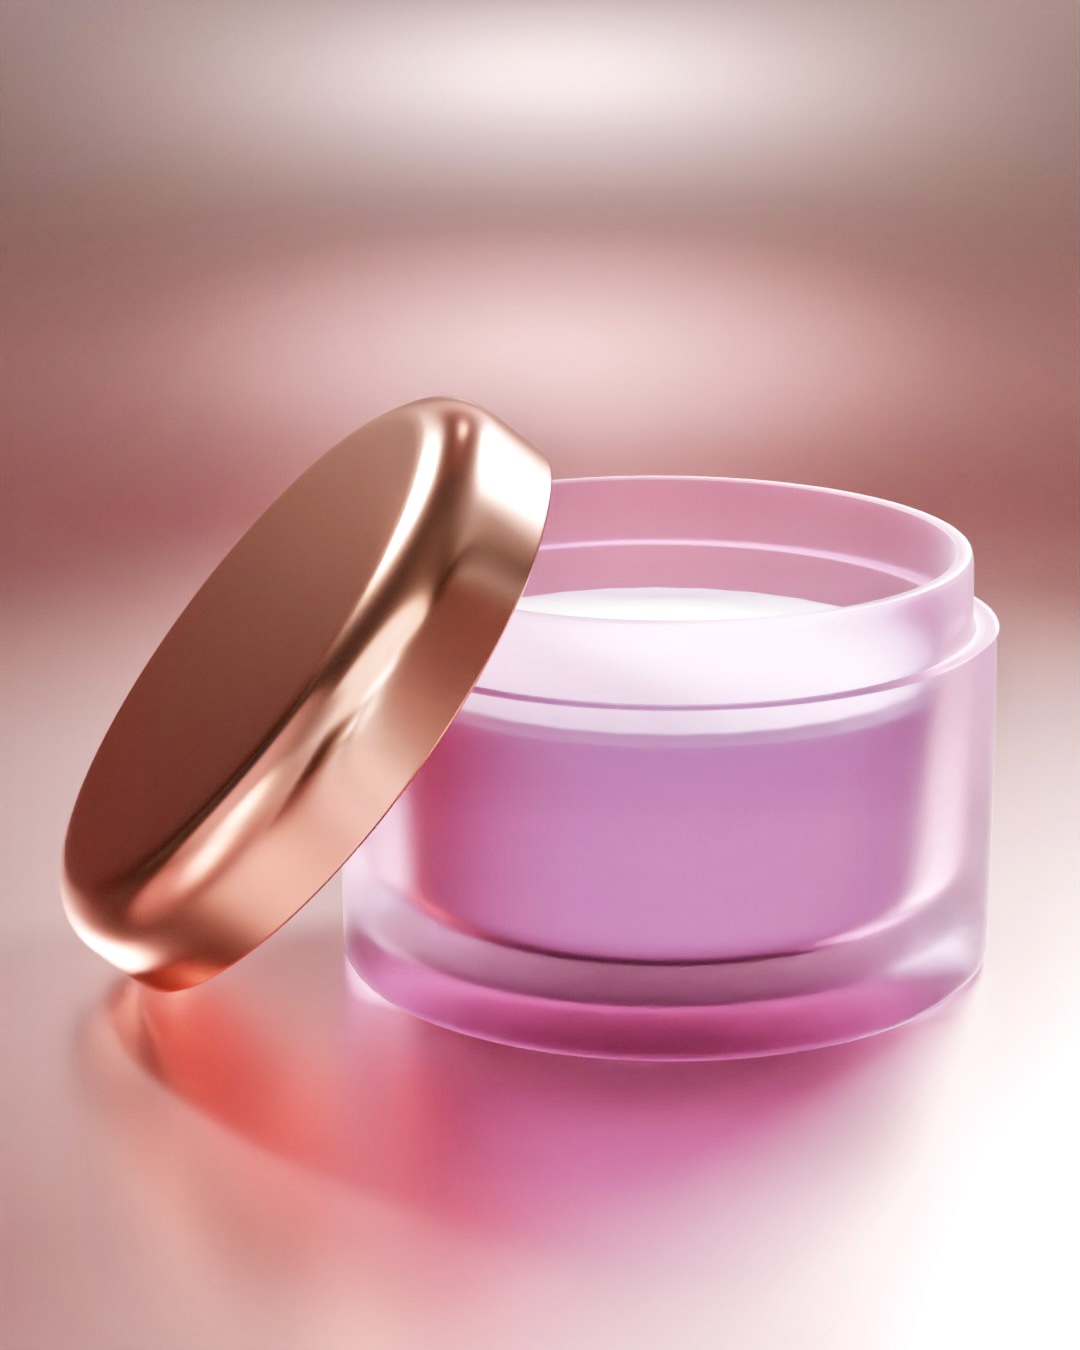 A design concept for cosmetics. This product were created with 3D software